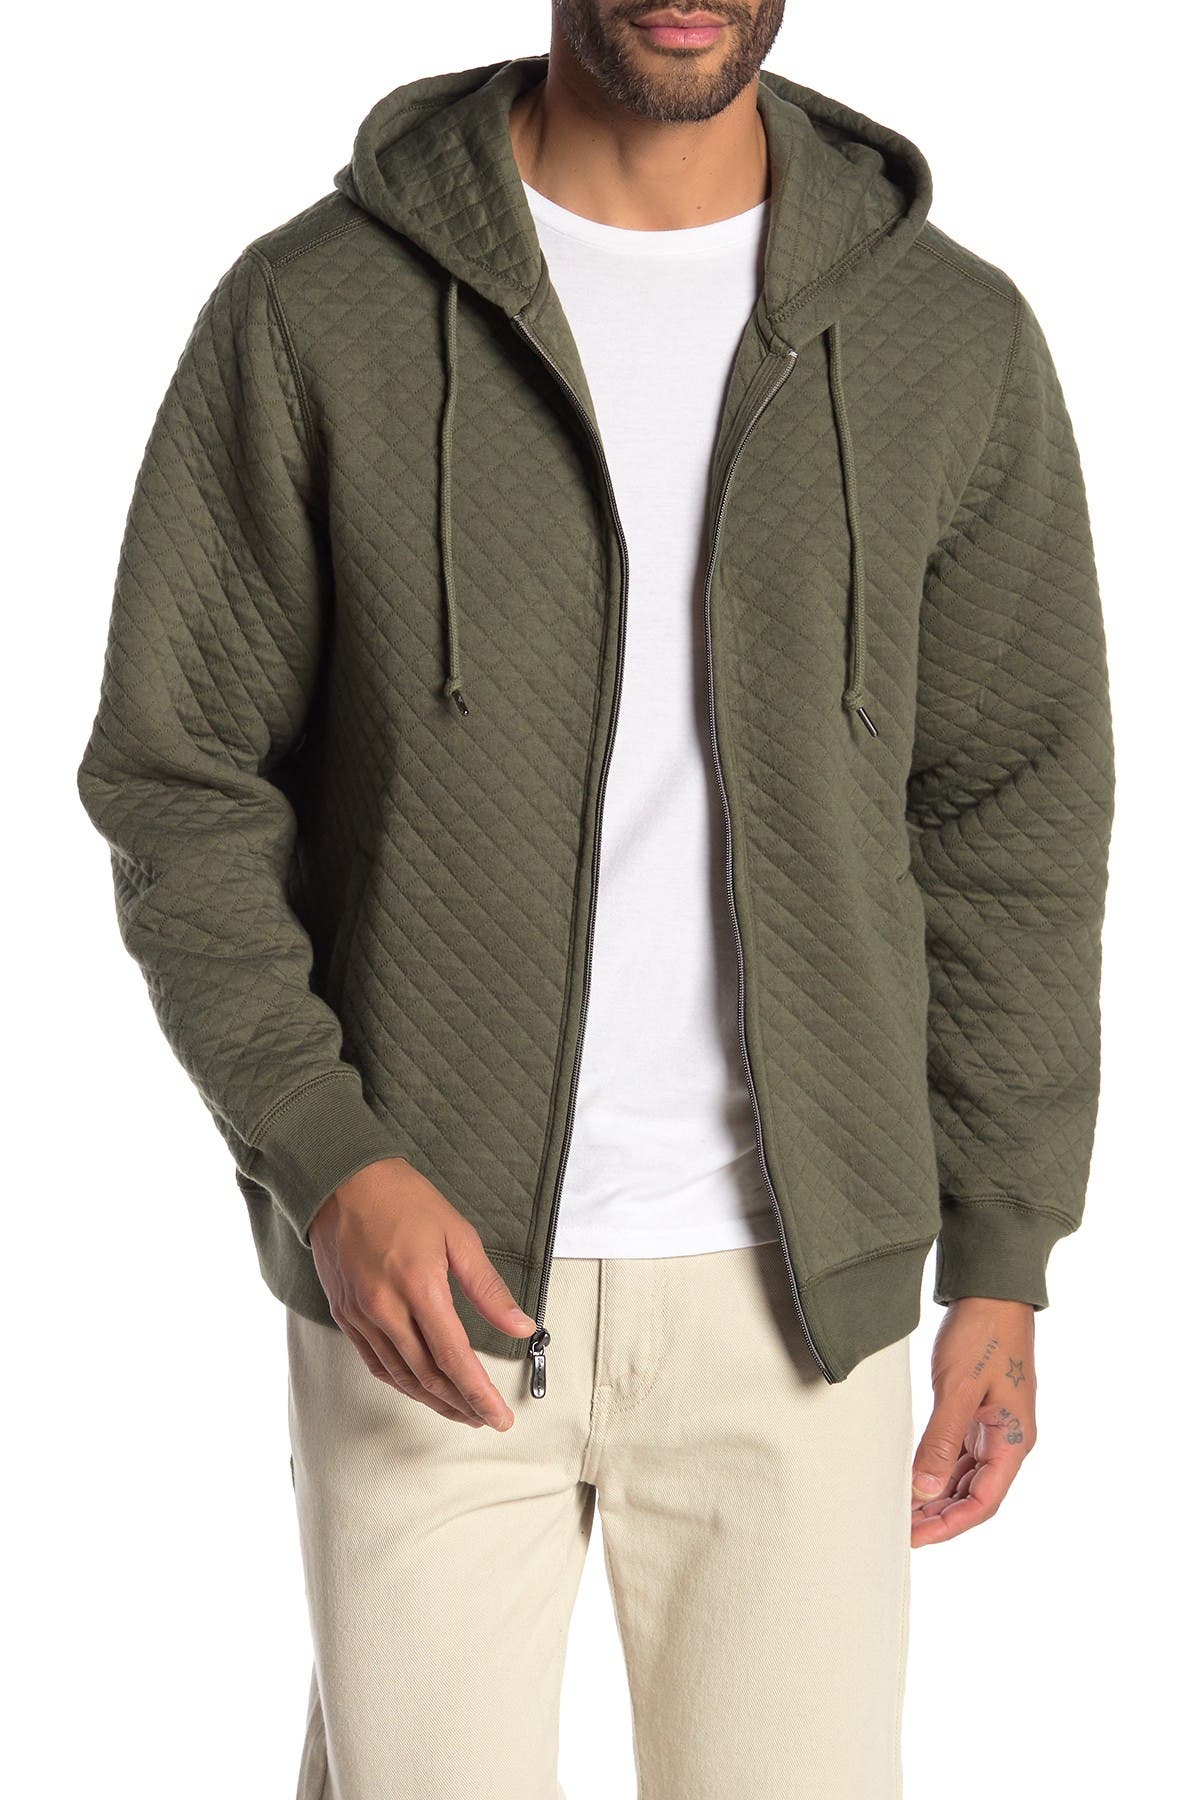 tommy bahama quilted jacket